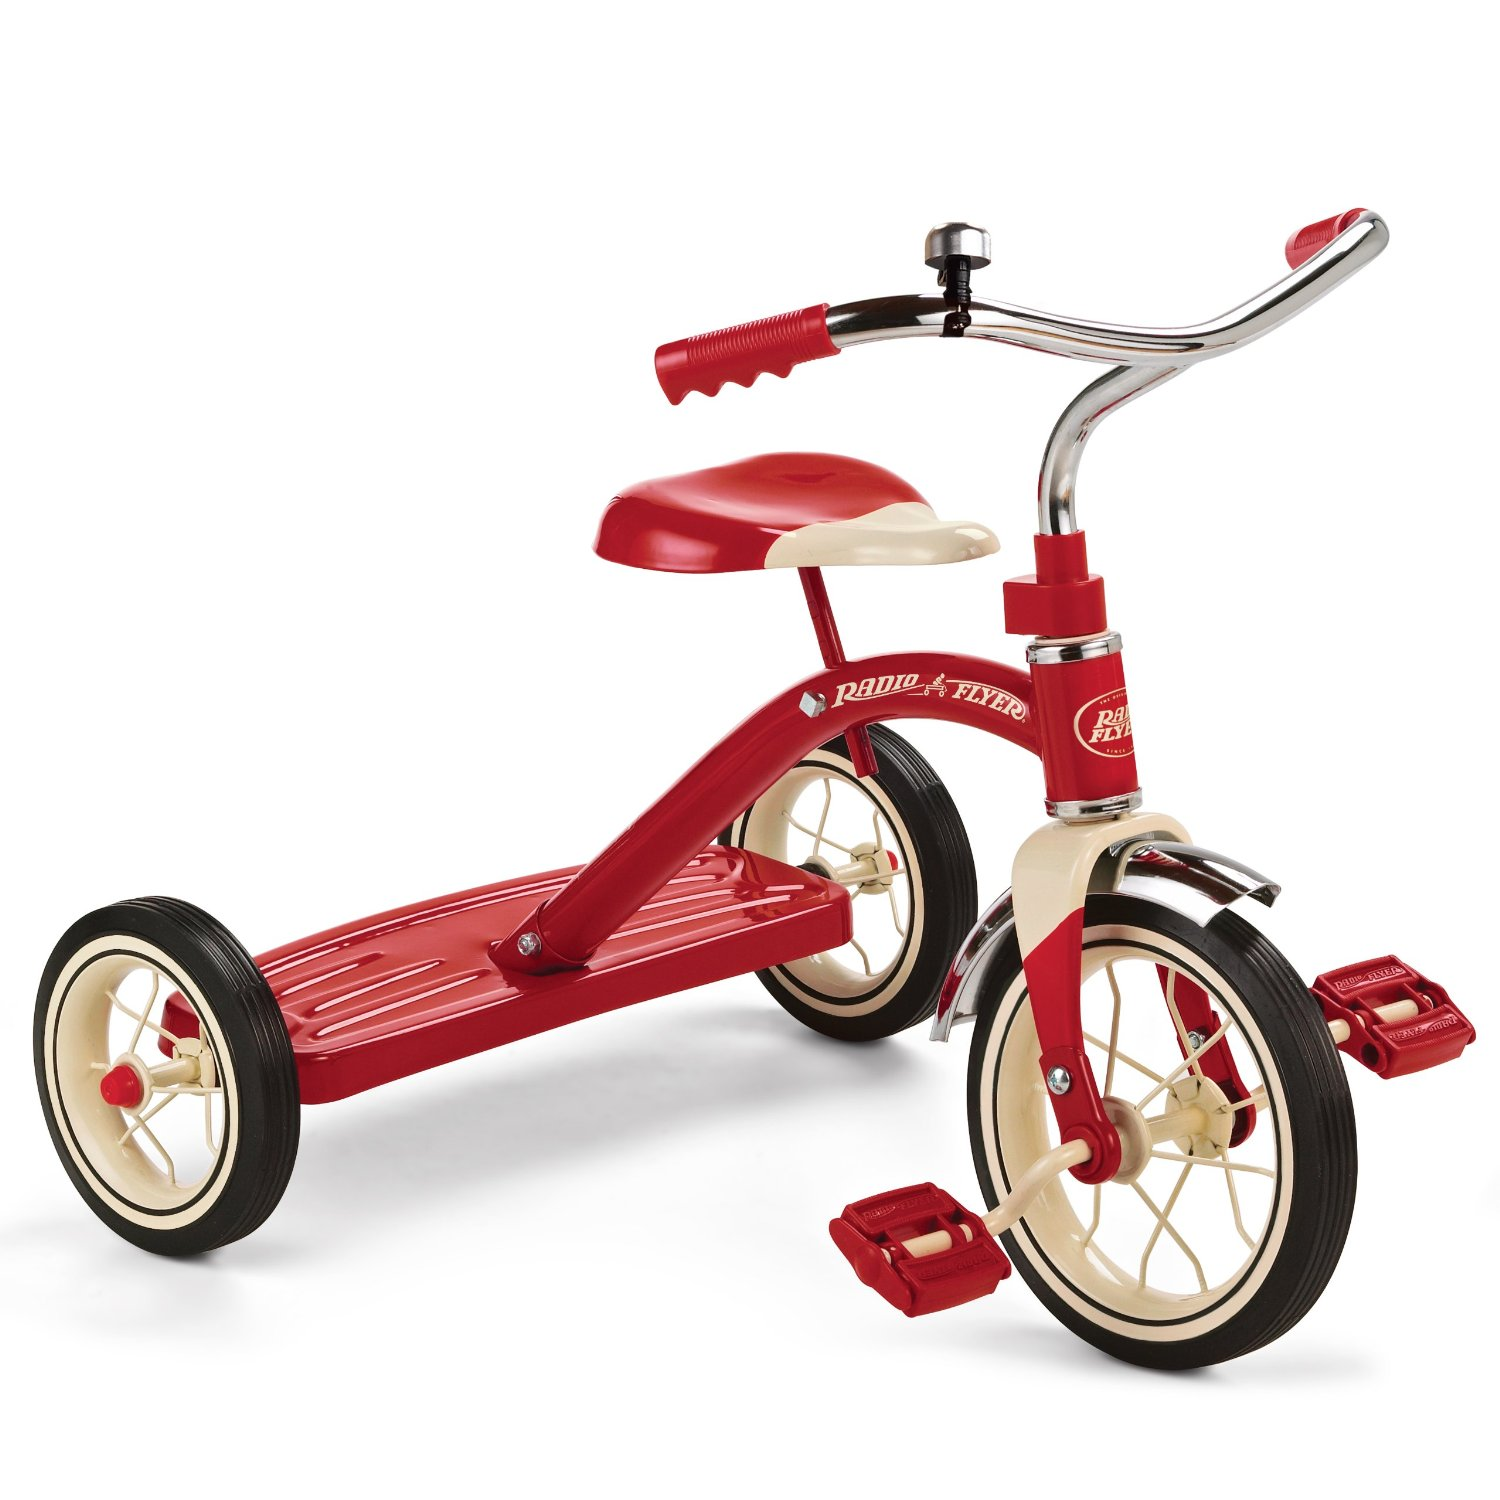 Radio Flyer Classic Red Tricycle Just $39.99 on Amazon!